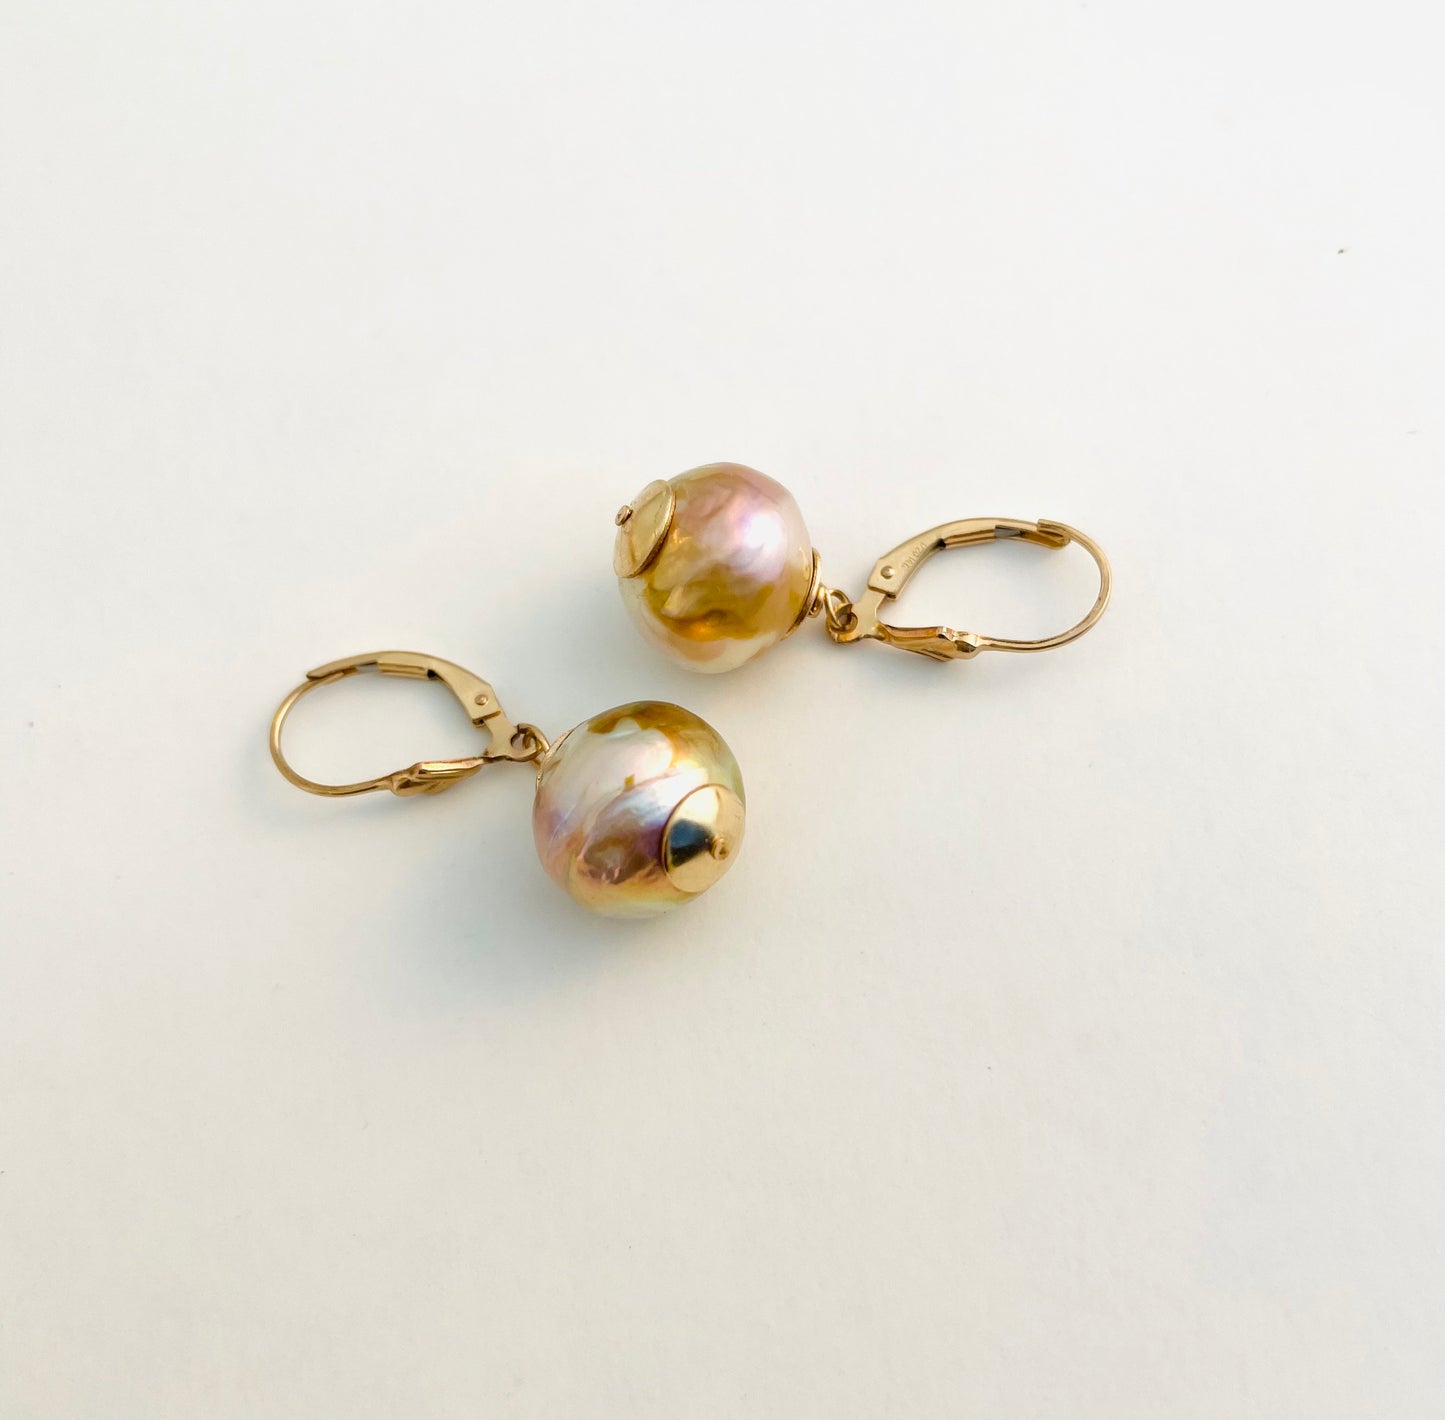 Baroque pearl and 14K gold filled earrings